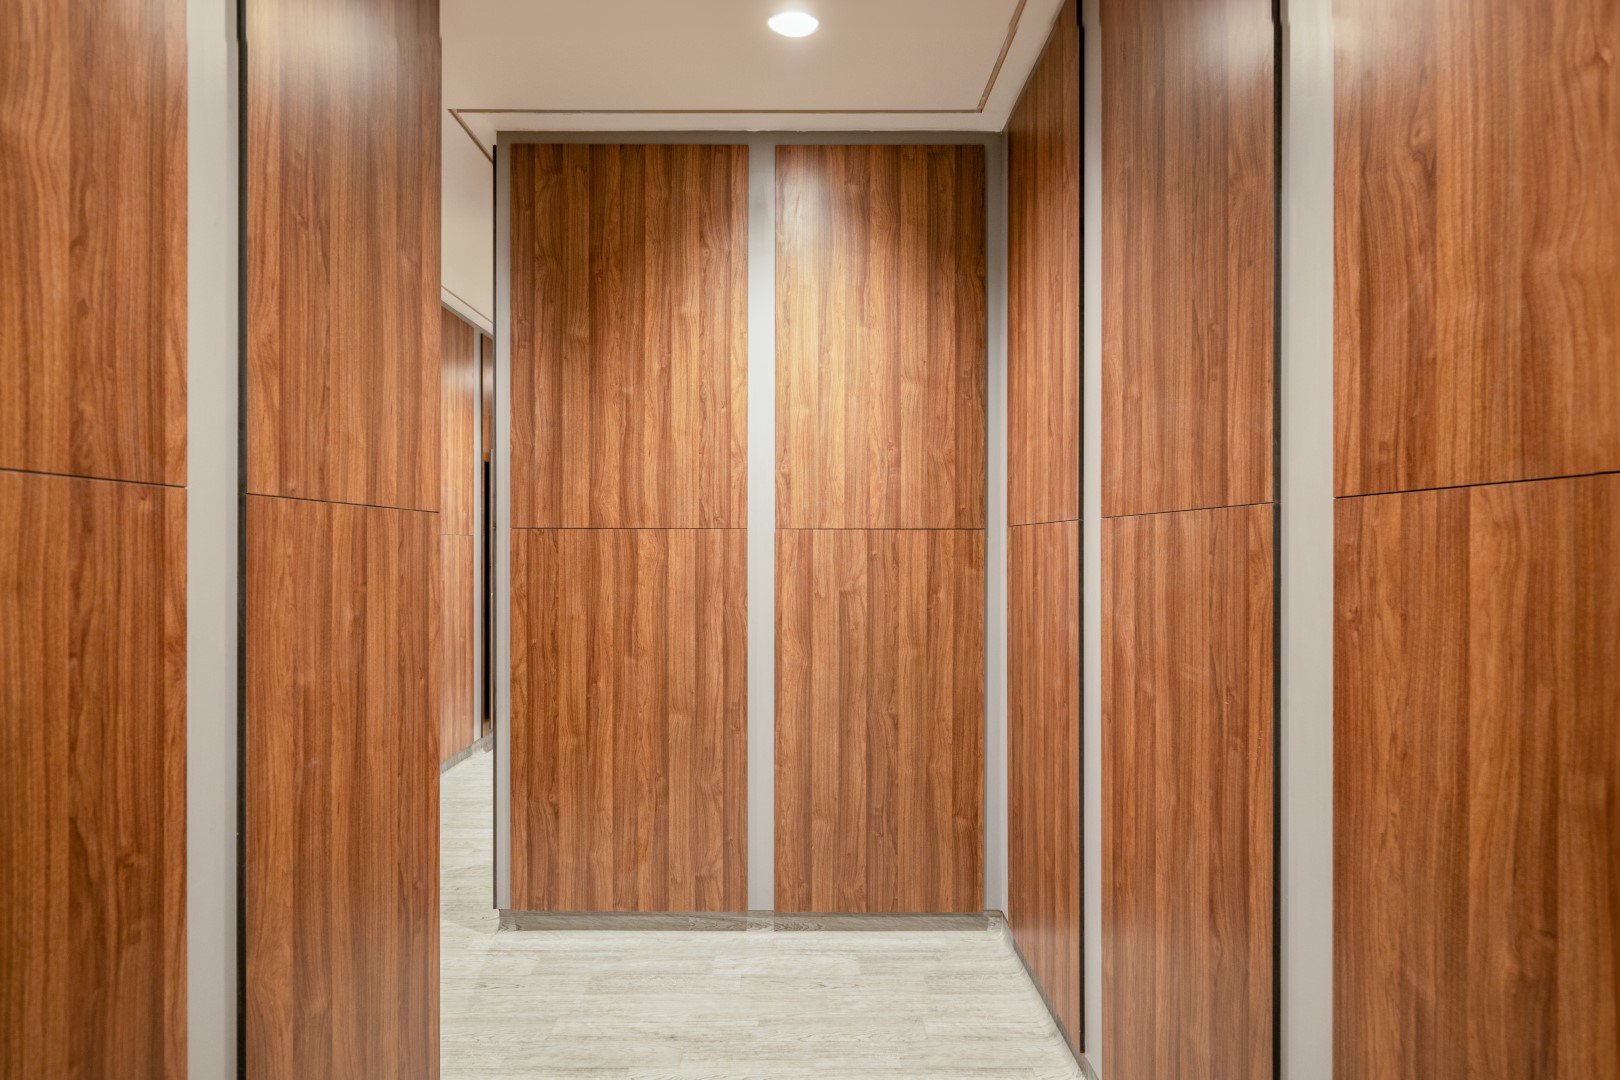  entrance to a commercial washroom with wood effect walls 